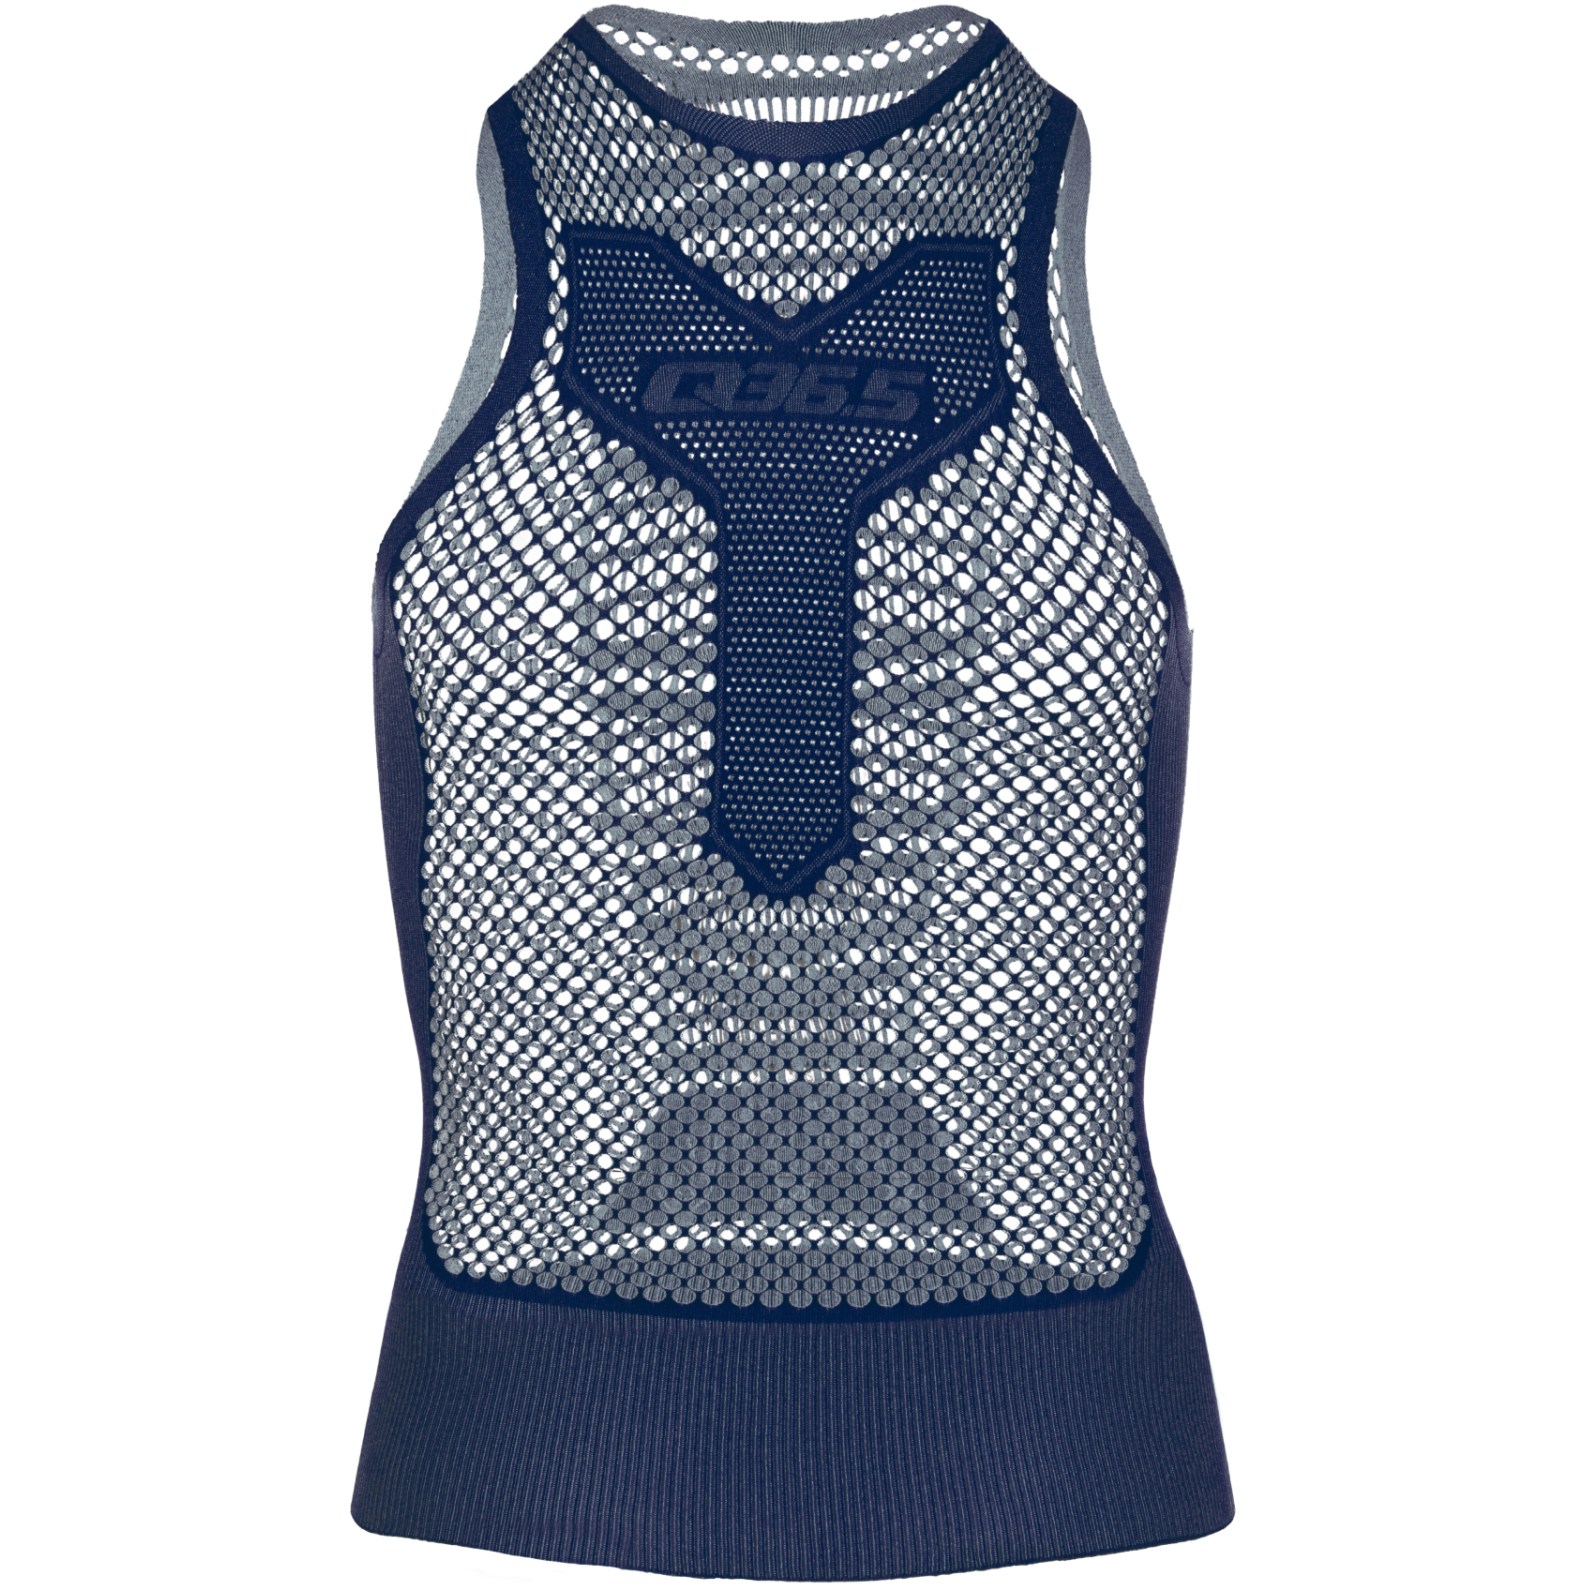 Picture of Q36.5 Base Layer Zero Mesh - blue navy